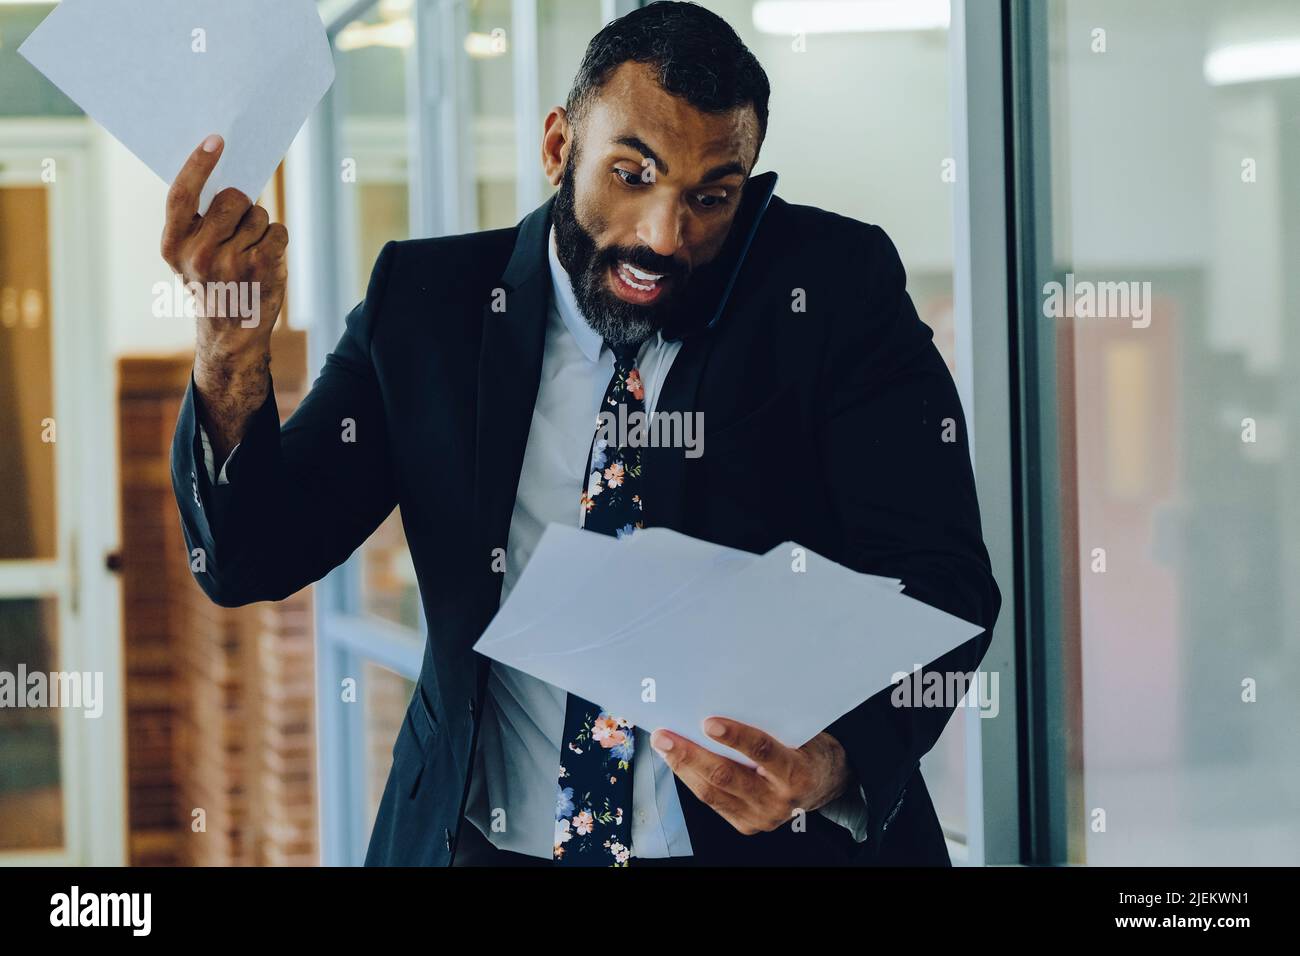 Mid adult bearded black man Entrepreneur Businessman wearing suit holding papers and talking on smartphone stressed walking in office shot Stock Photo